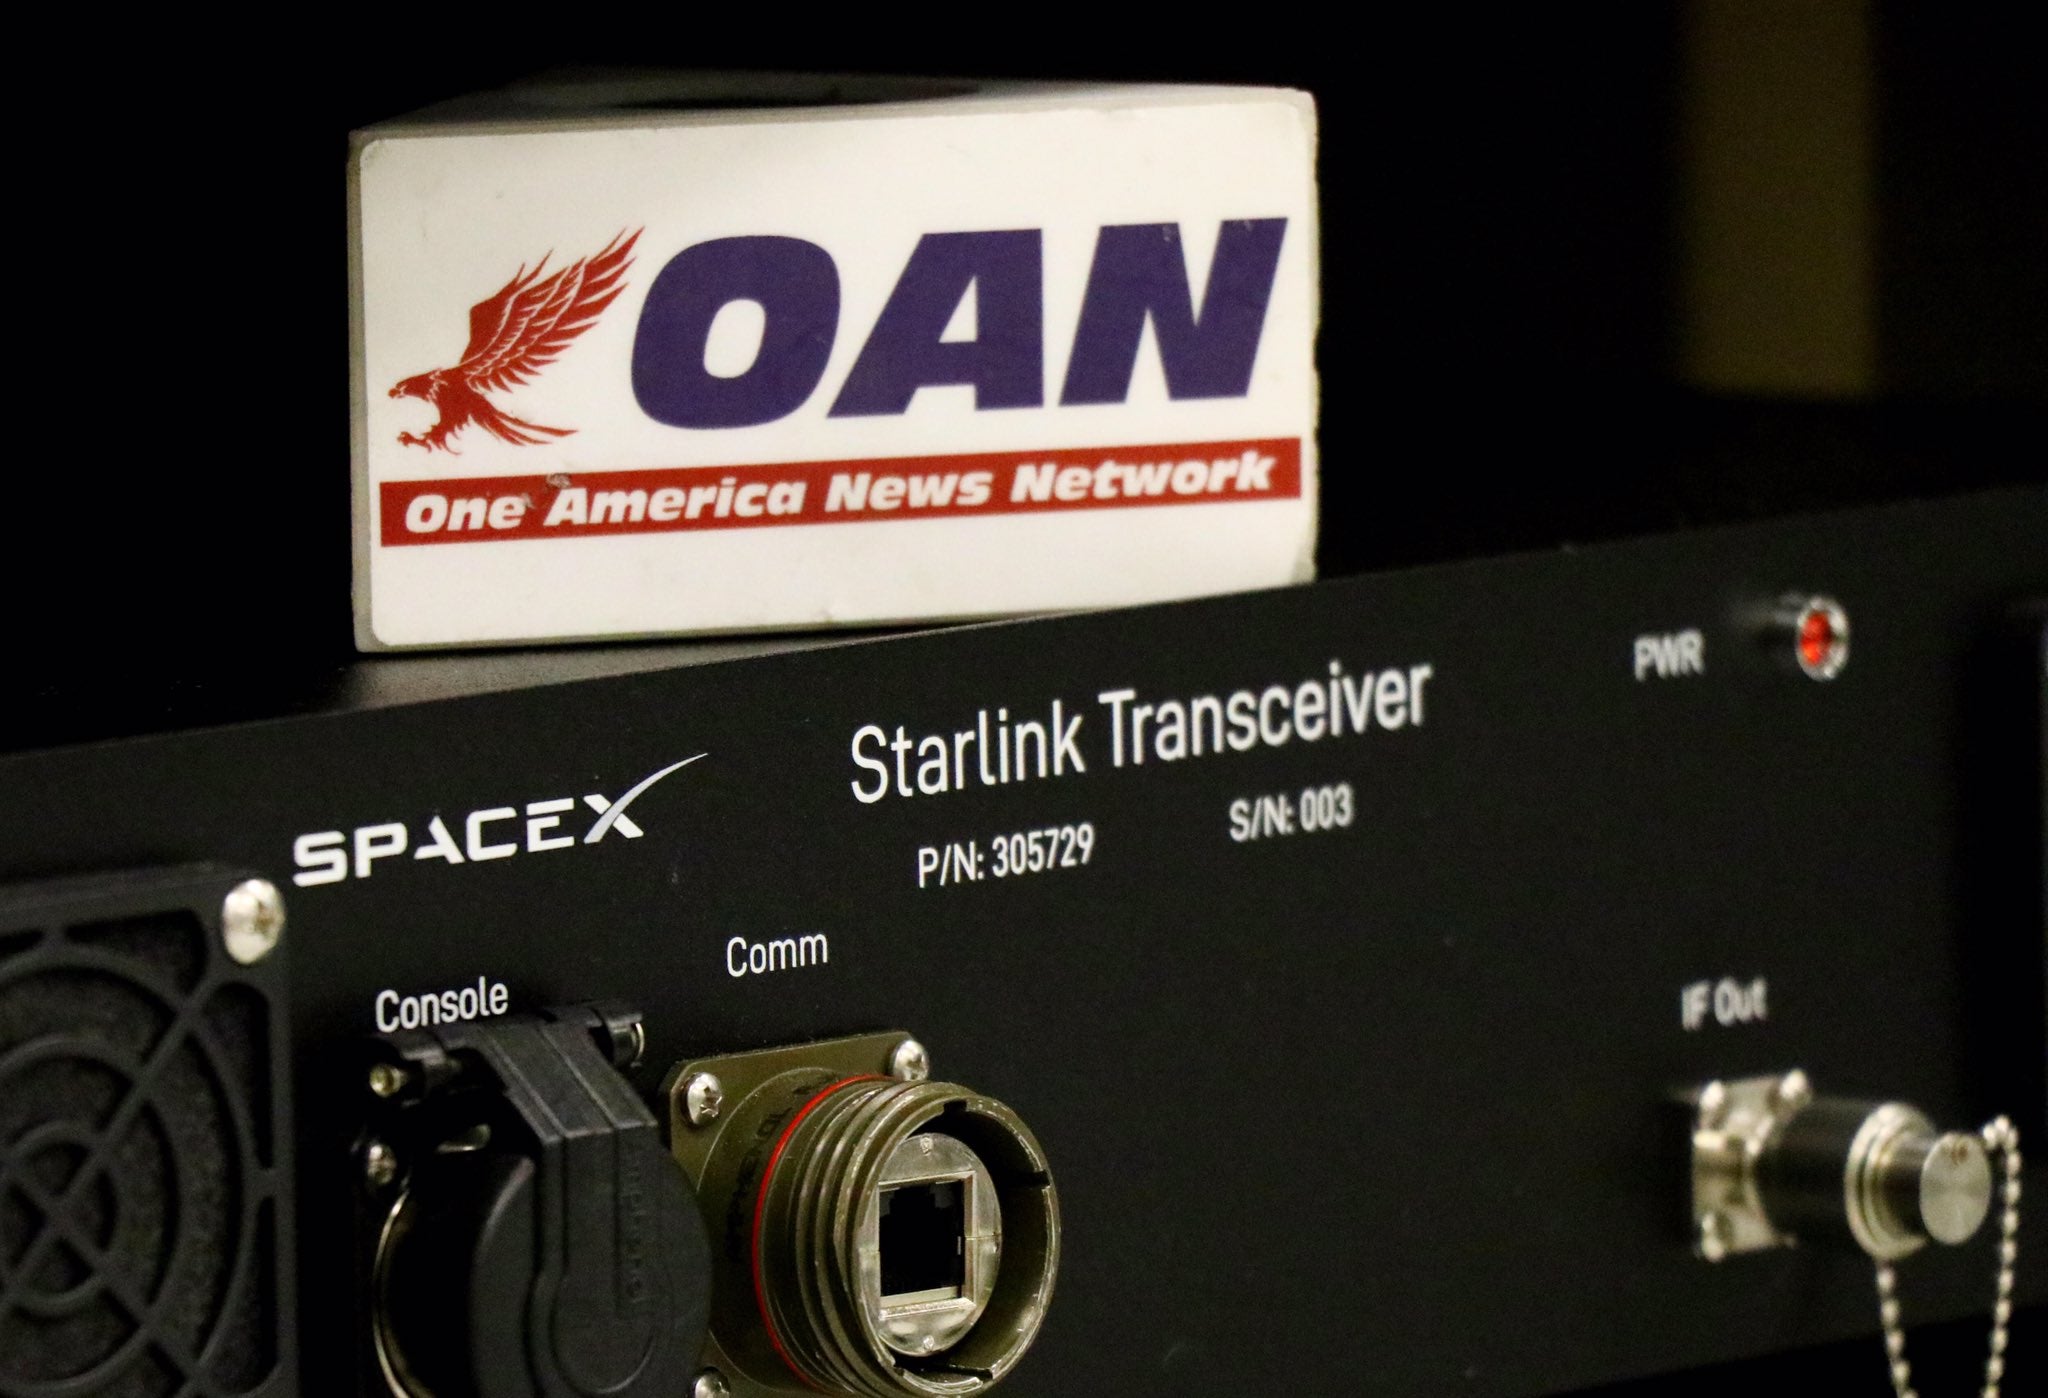 SpaceX's Starlink Transceiver revealed in a photograph